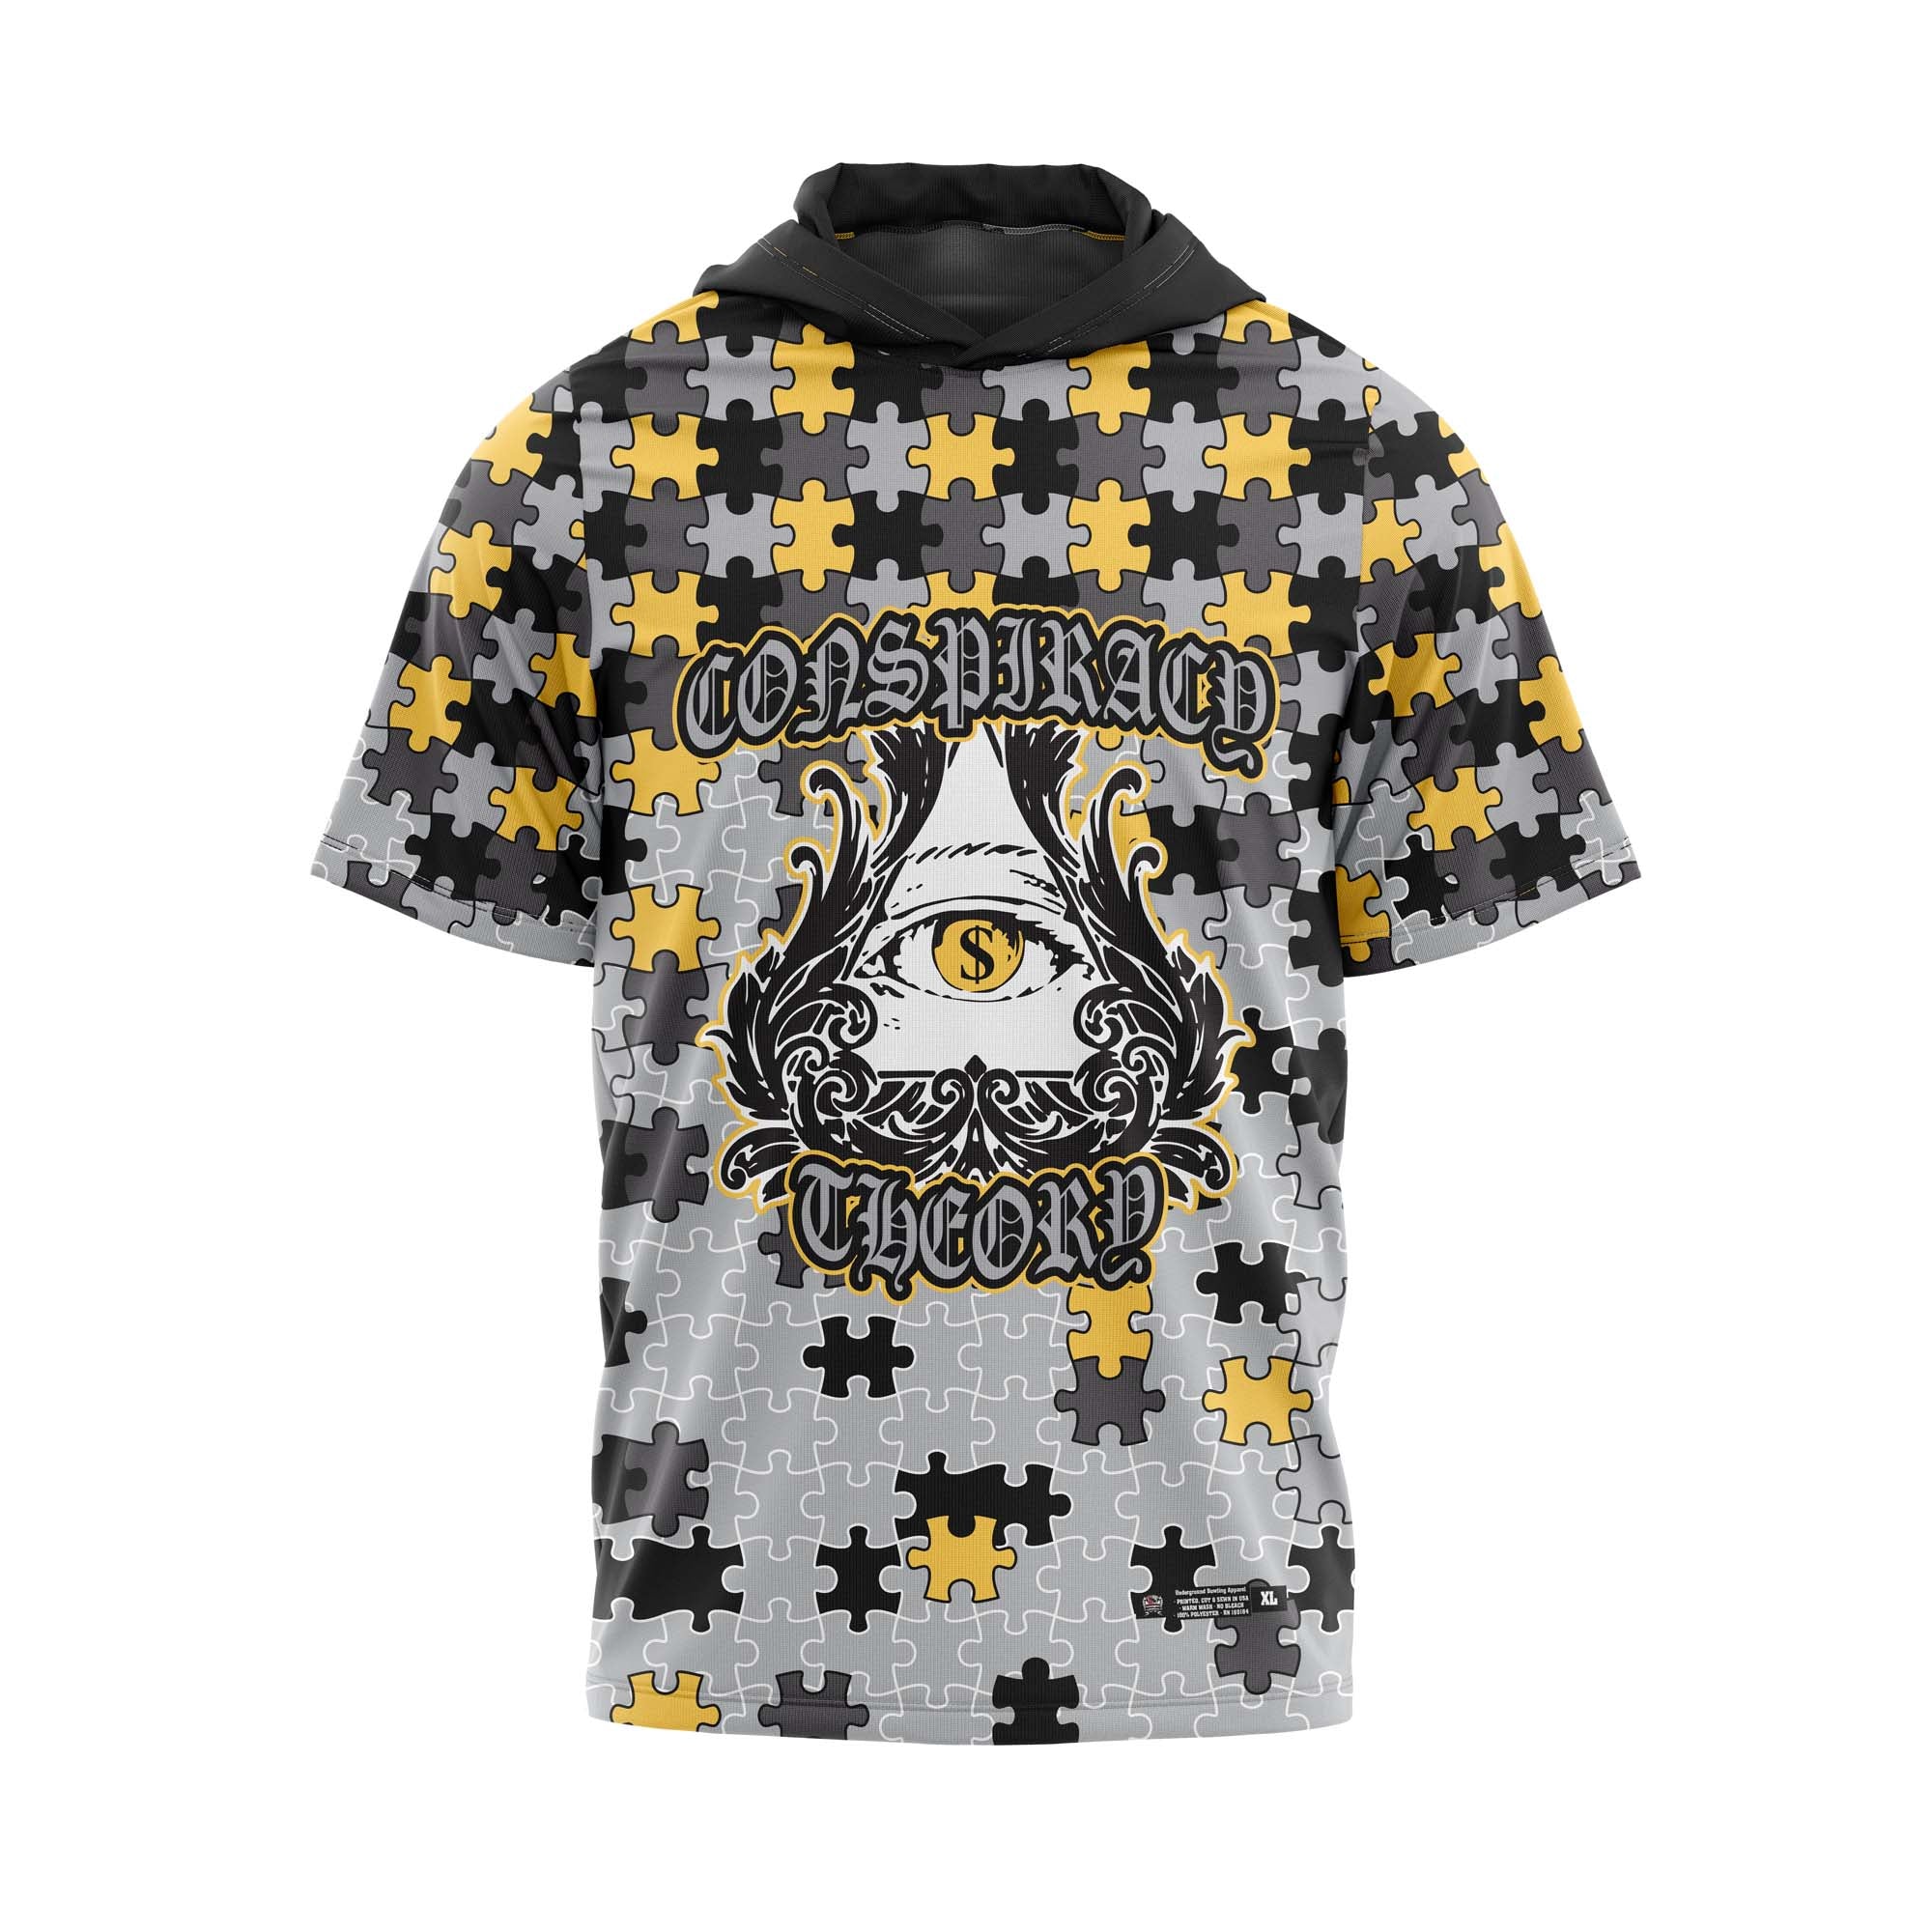 Conspiracy Theory Puzzle Jersey